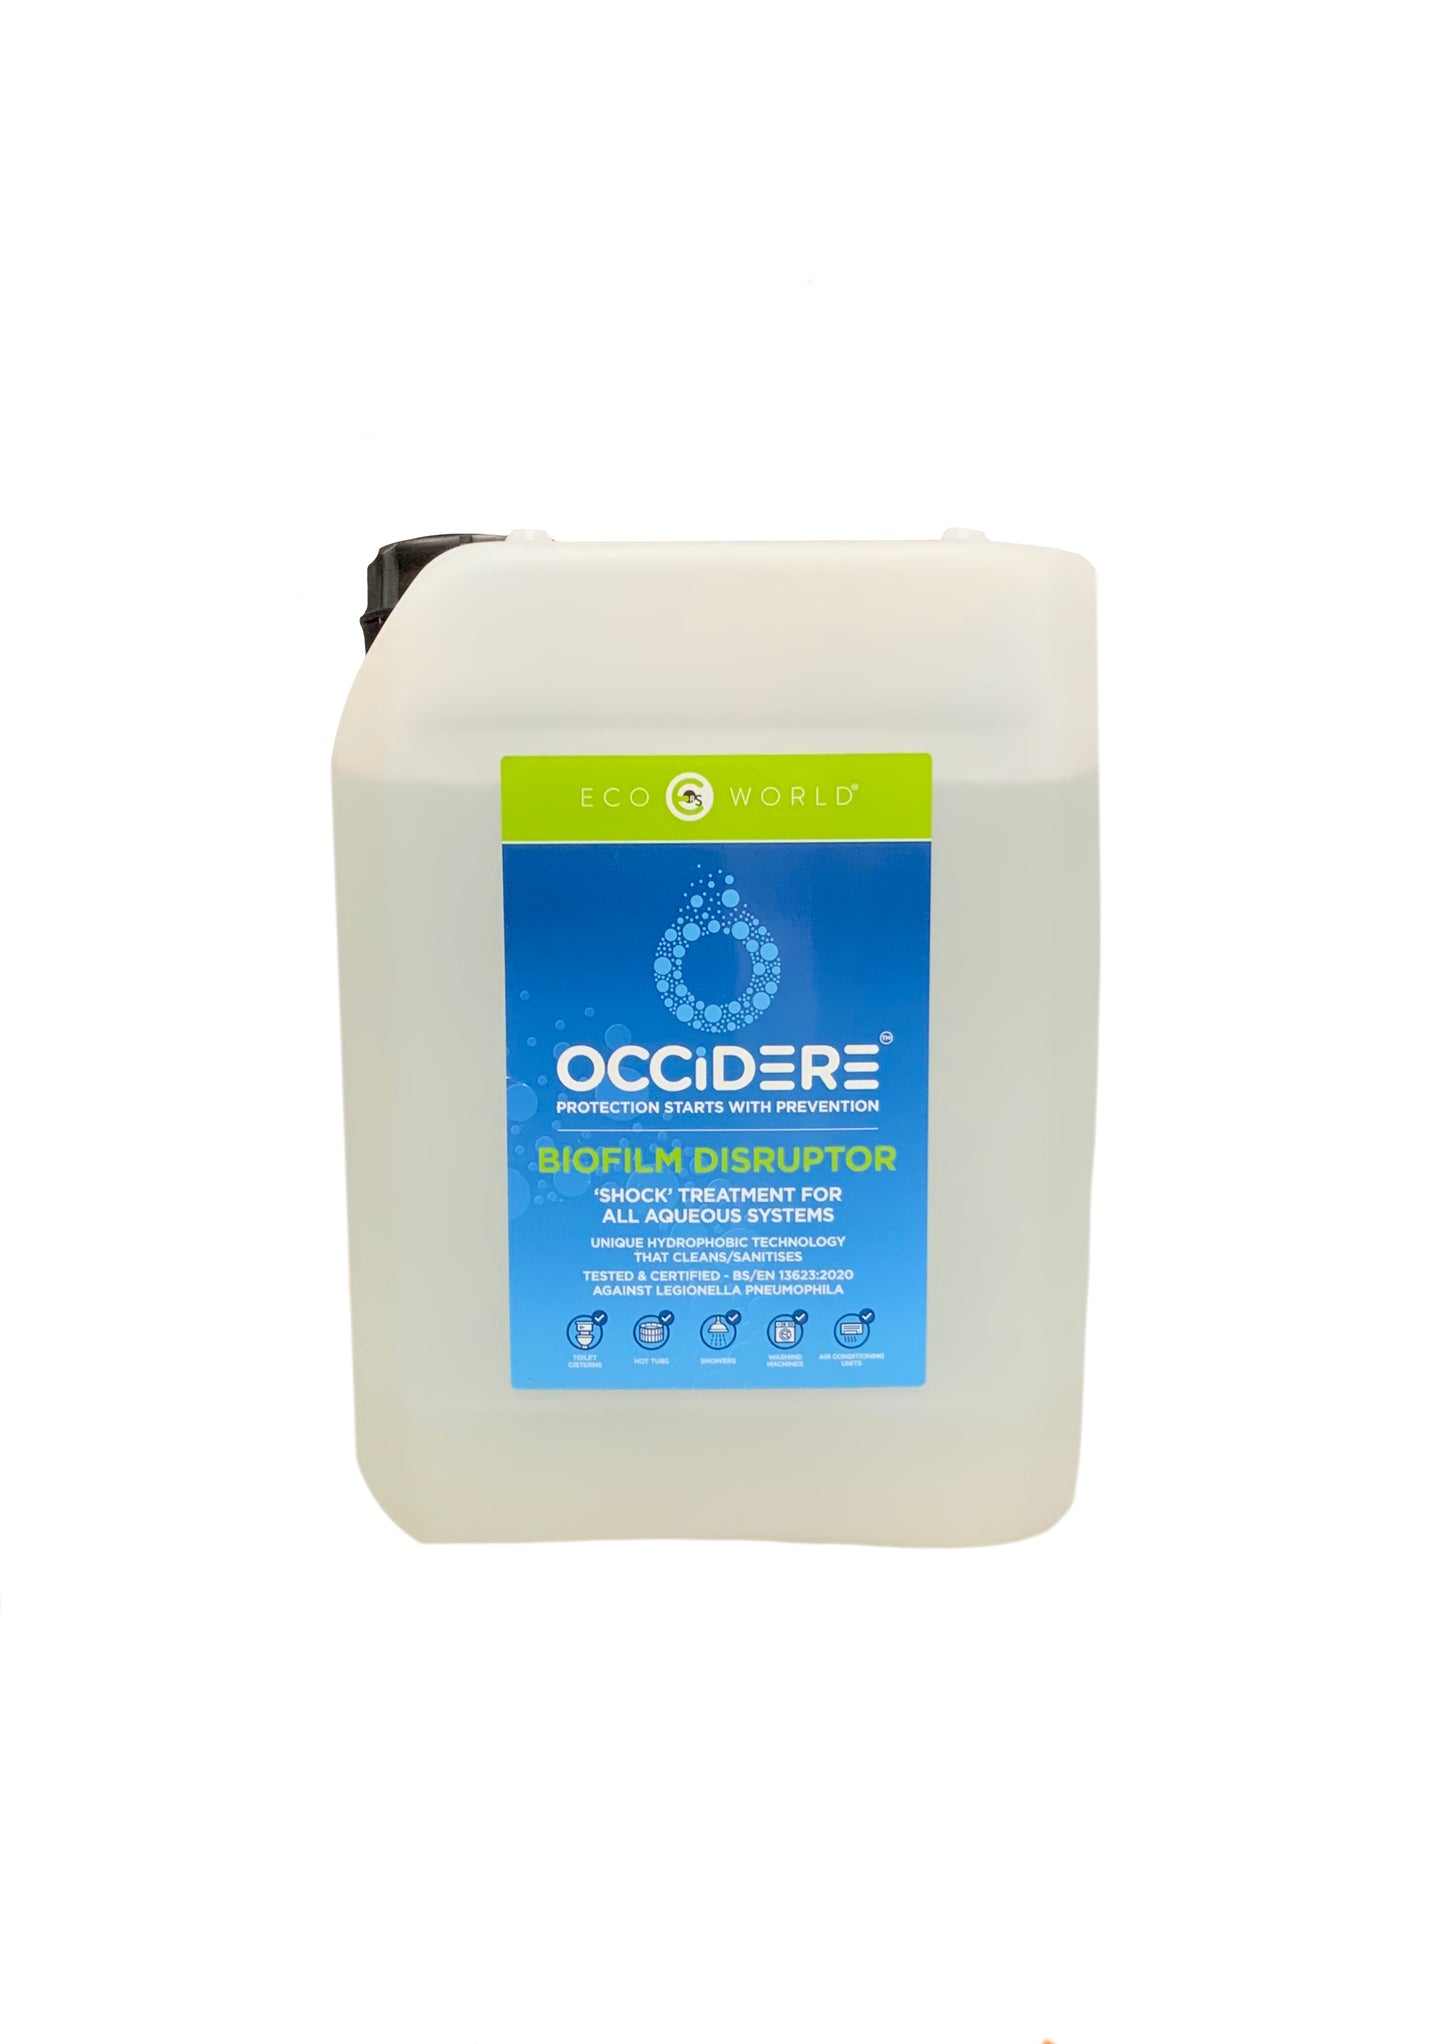 OCCIDERE® BIOFILM DISRUPTOR (5 Litre)  - A Biofilm Cleansing Treatment for use in HOT TUBS, SPAs, JACUZZIS, WASHING MACHINES, DISHWASHERS, SHOWERHEADS & more…